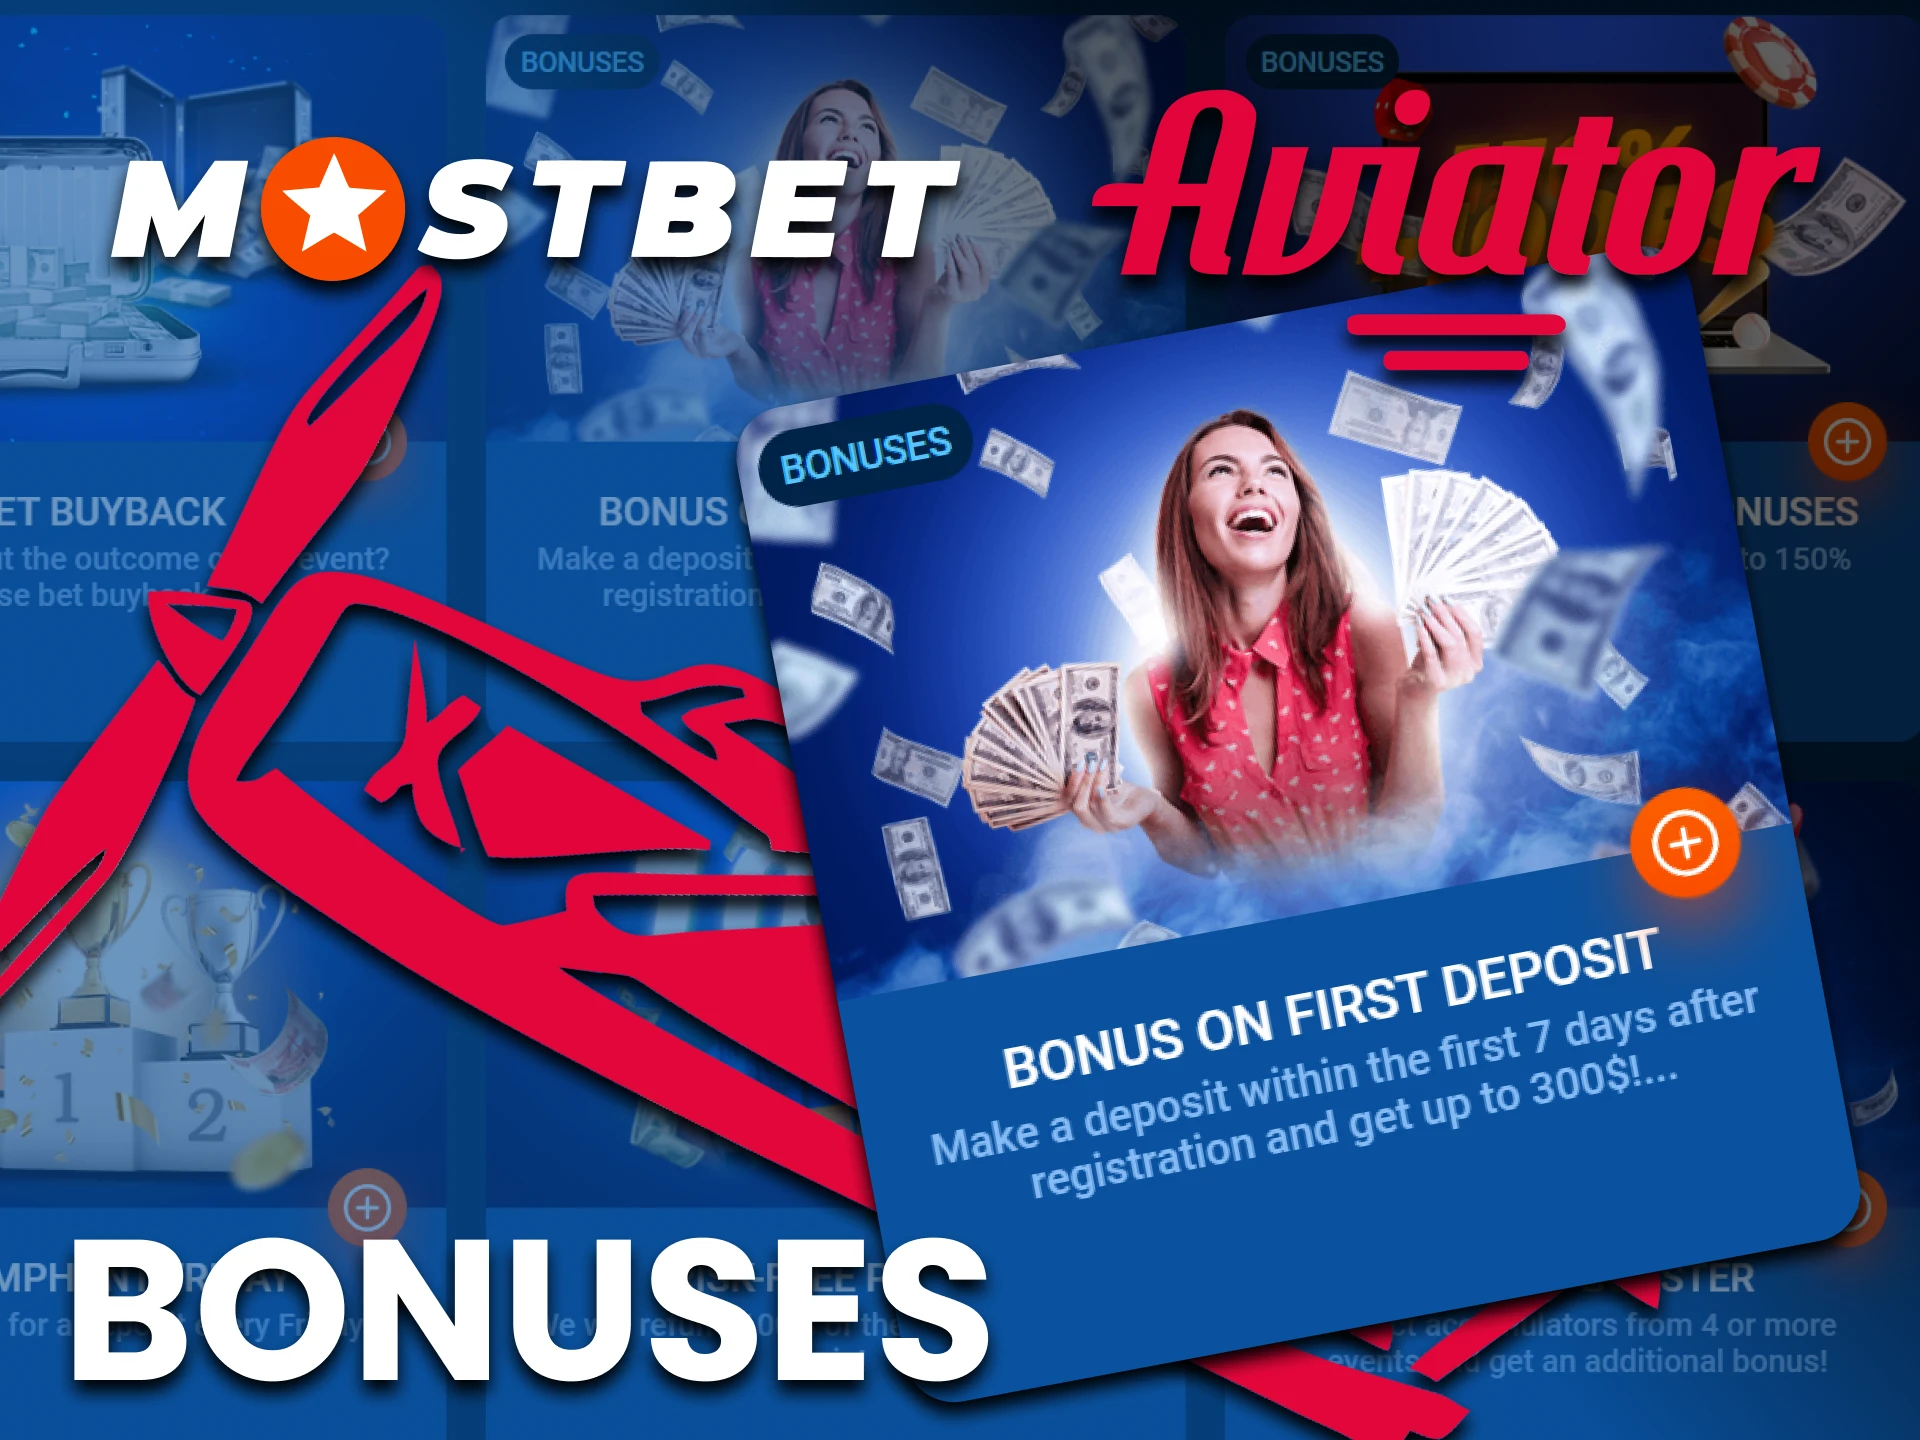 Any newcomer on Mostbet gets a bonus on the first deposit.